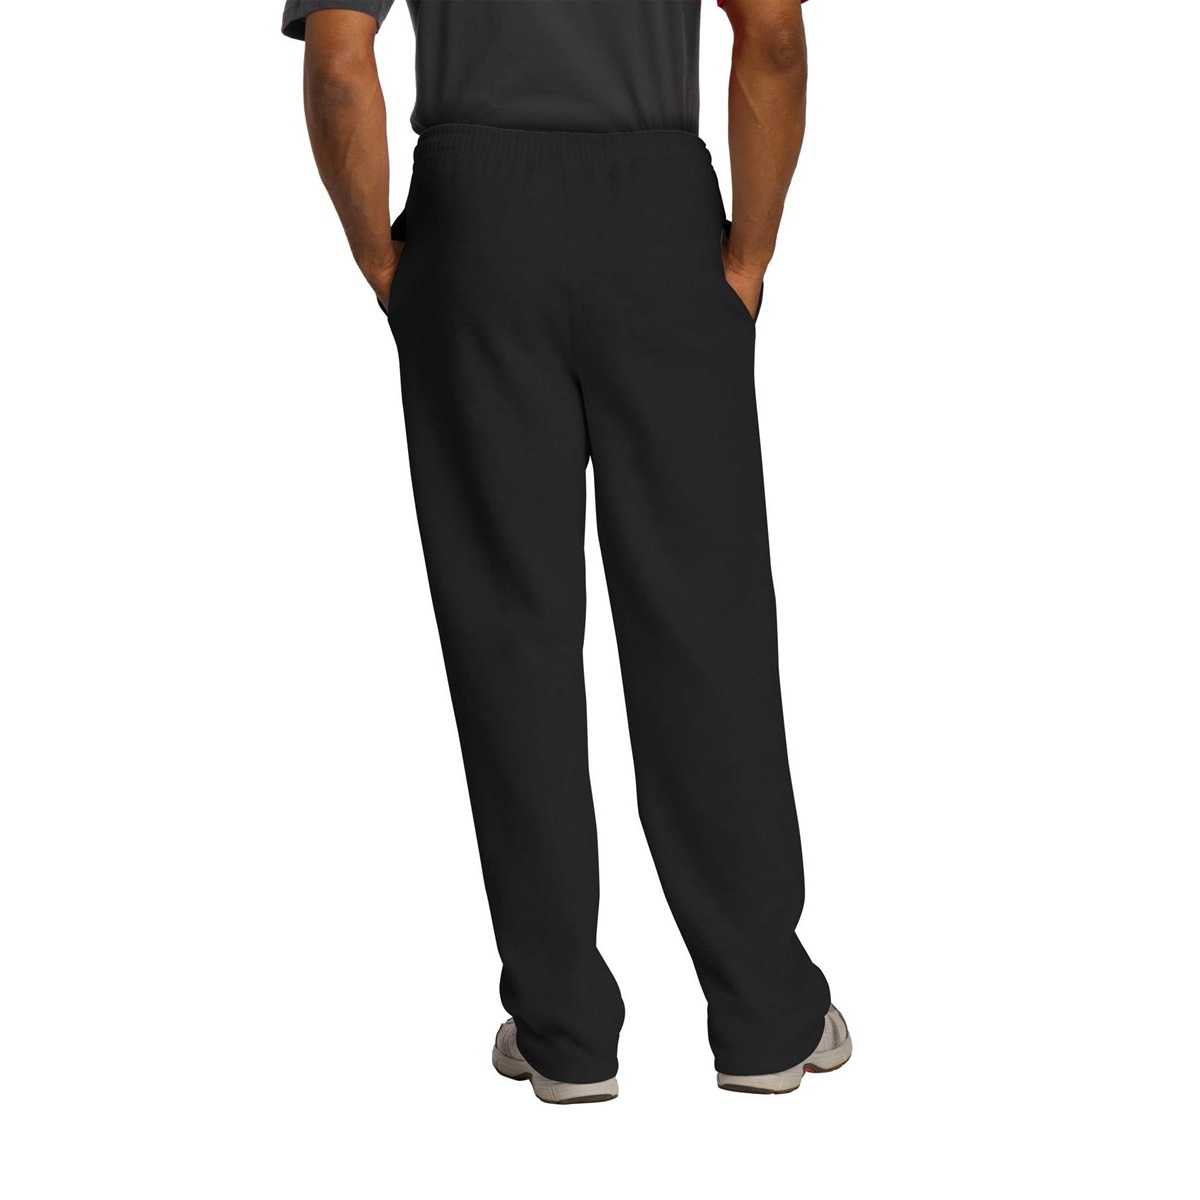 Jerzees 974MP NuBlend Open Bottom Pants with Pockets - Black | Full Source